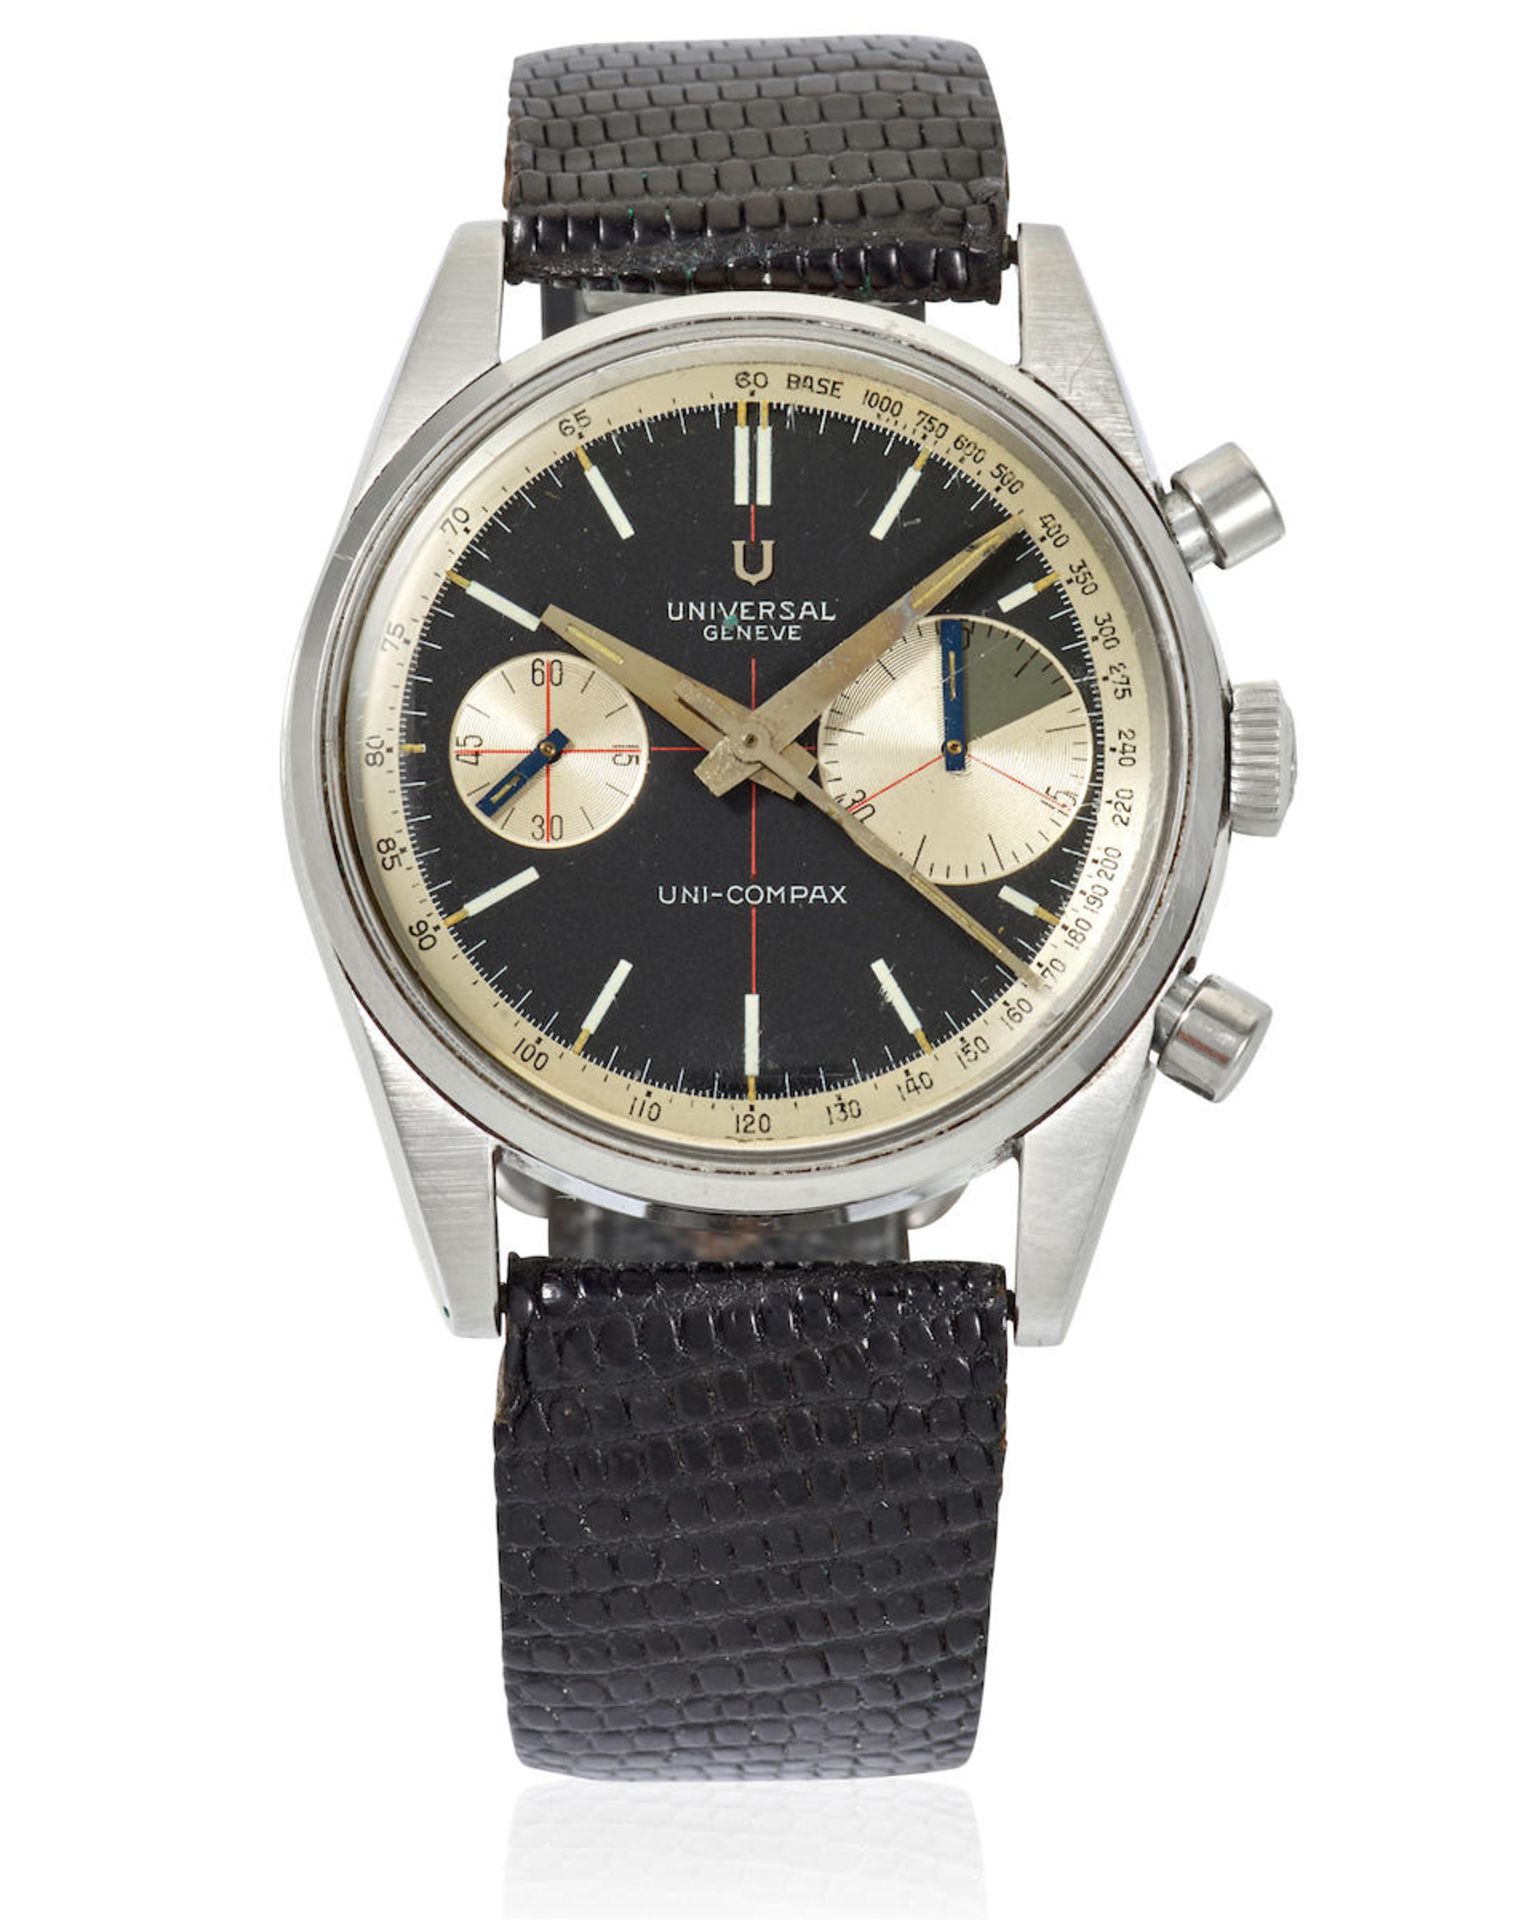 UNIVERSAL GENÈVE. A STAINLESS STEEL MANUAL WIND CHRONOGRAPH WRISTWATCH Uni-Compax, Ref: 884...